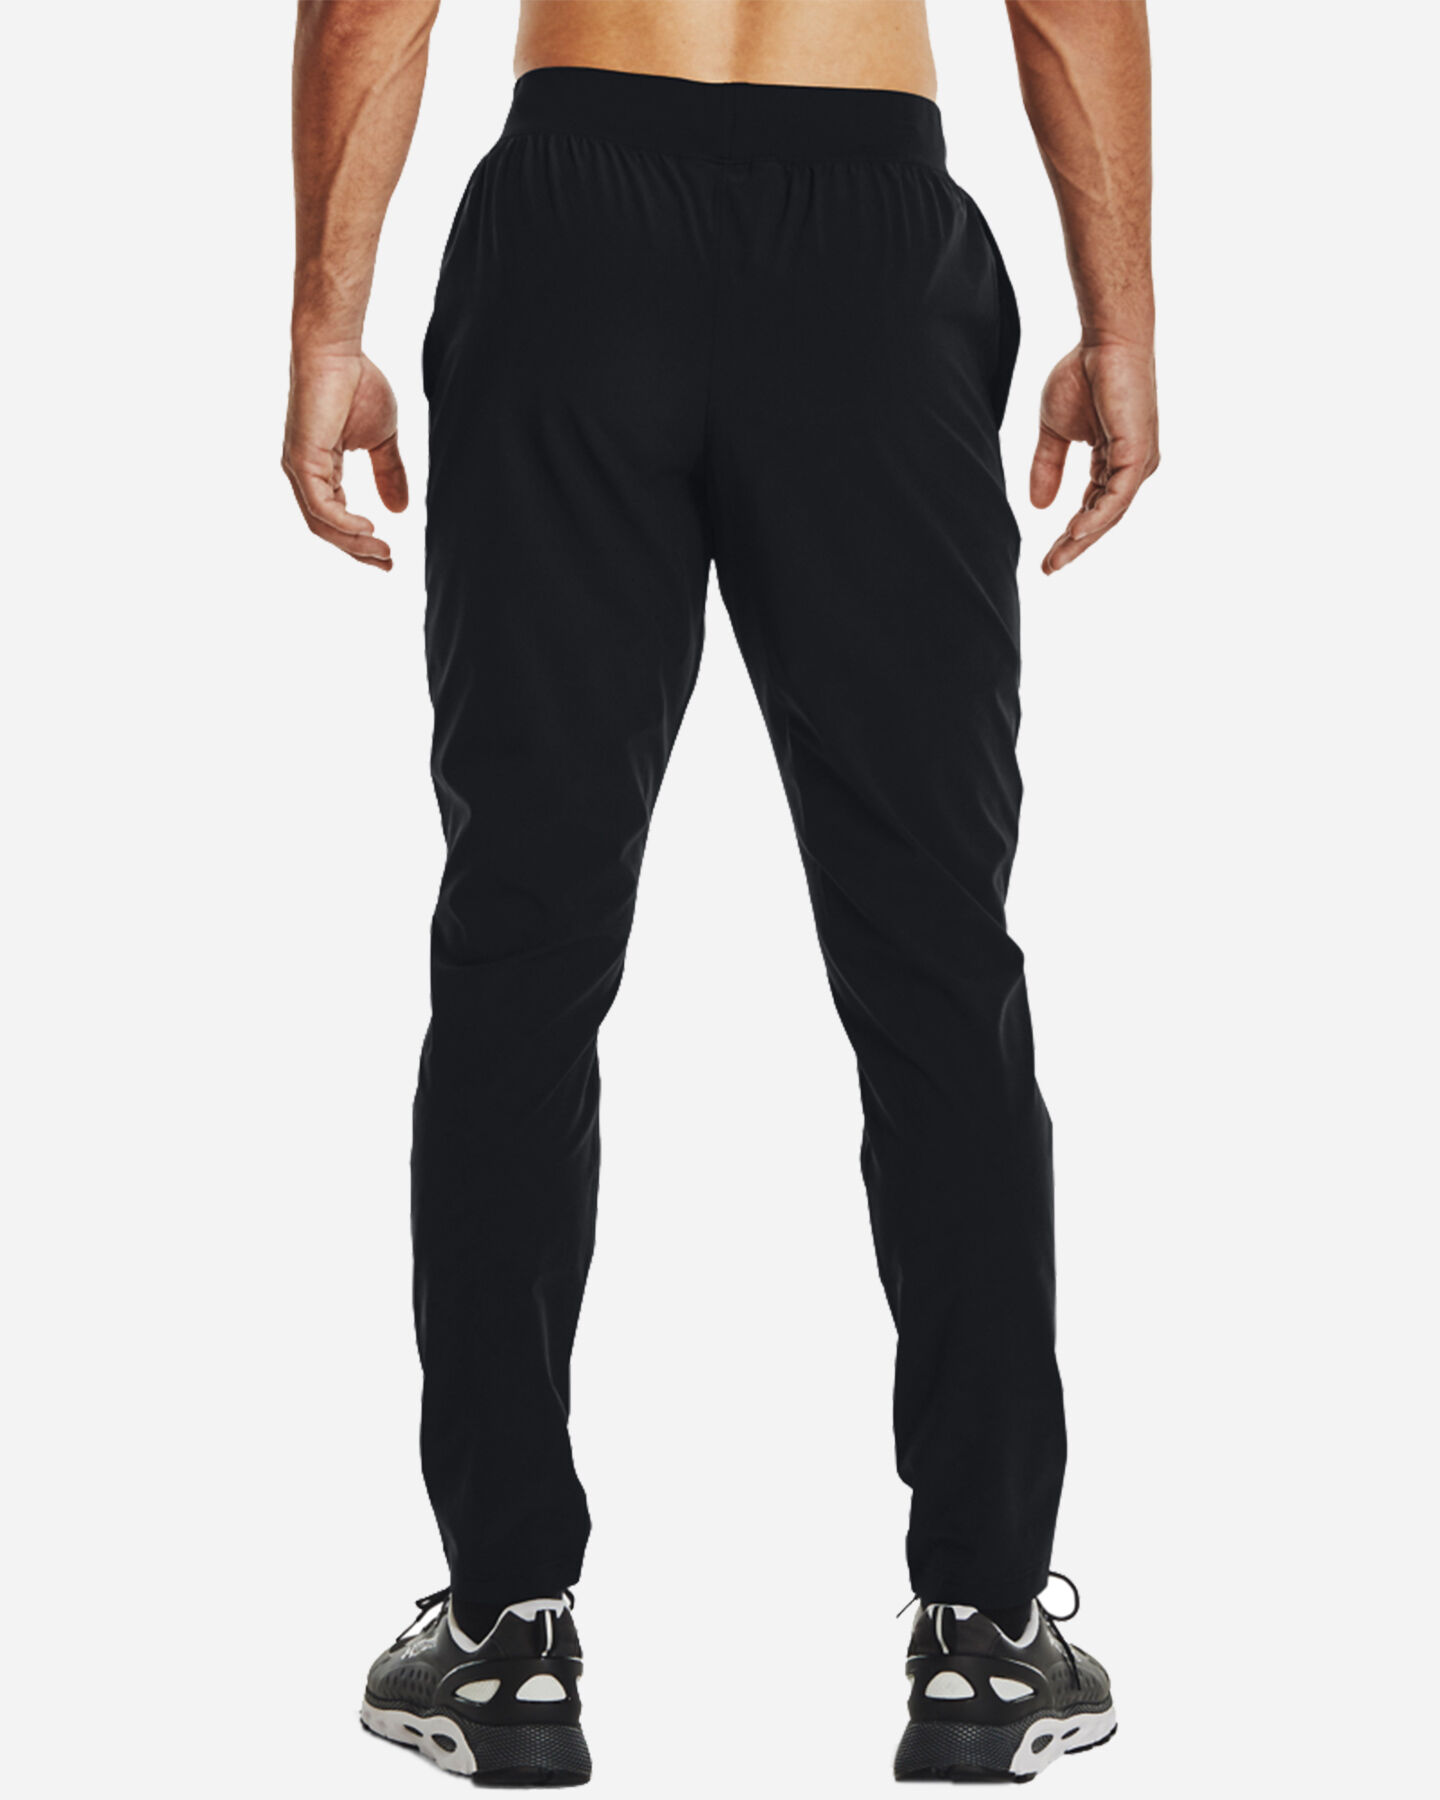  Pantalone training UNDER ARMOUR STRETCH WOVEN M S5336577|0001|XS scatto 3